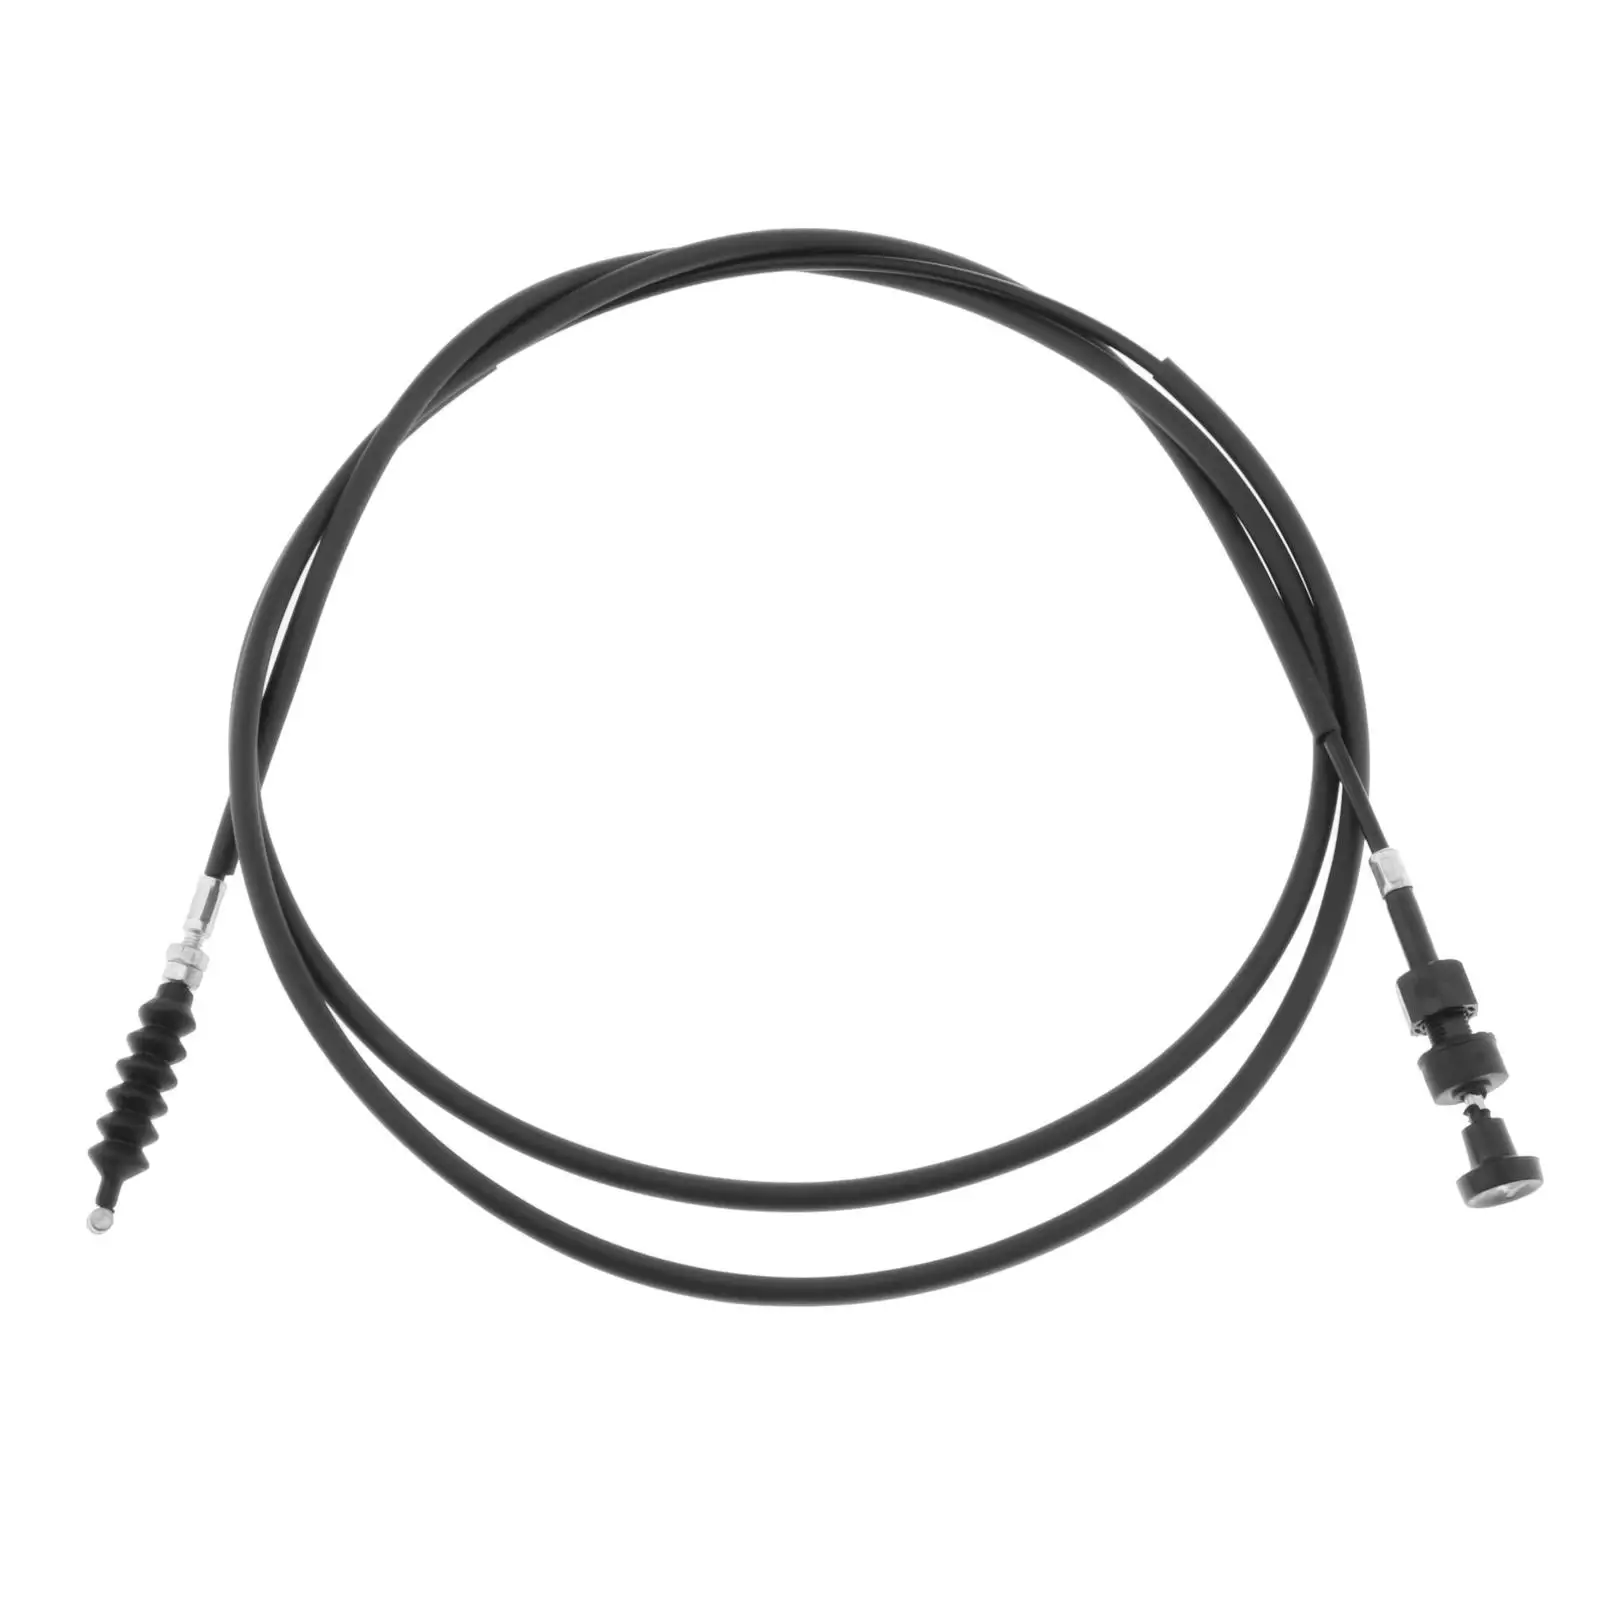 High Performance Choke Starter Cable 54017-1208 Fit for Kawasaki 3000, 3010, 3020, 4000, 4010 Mule